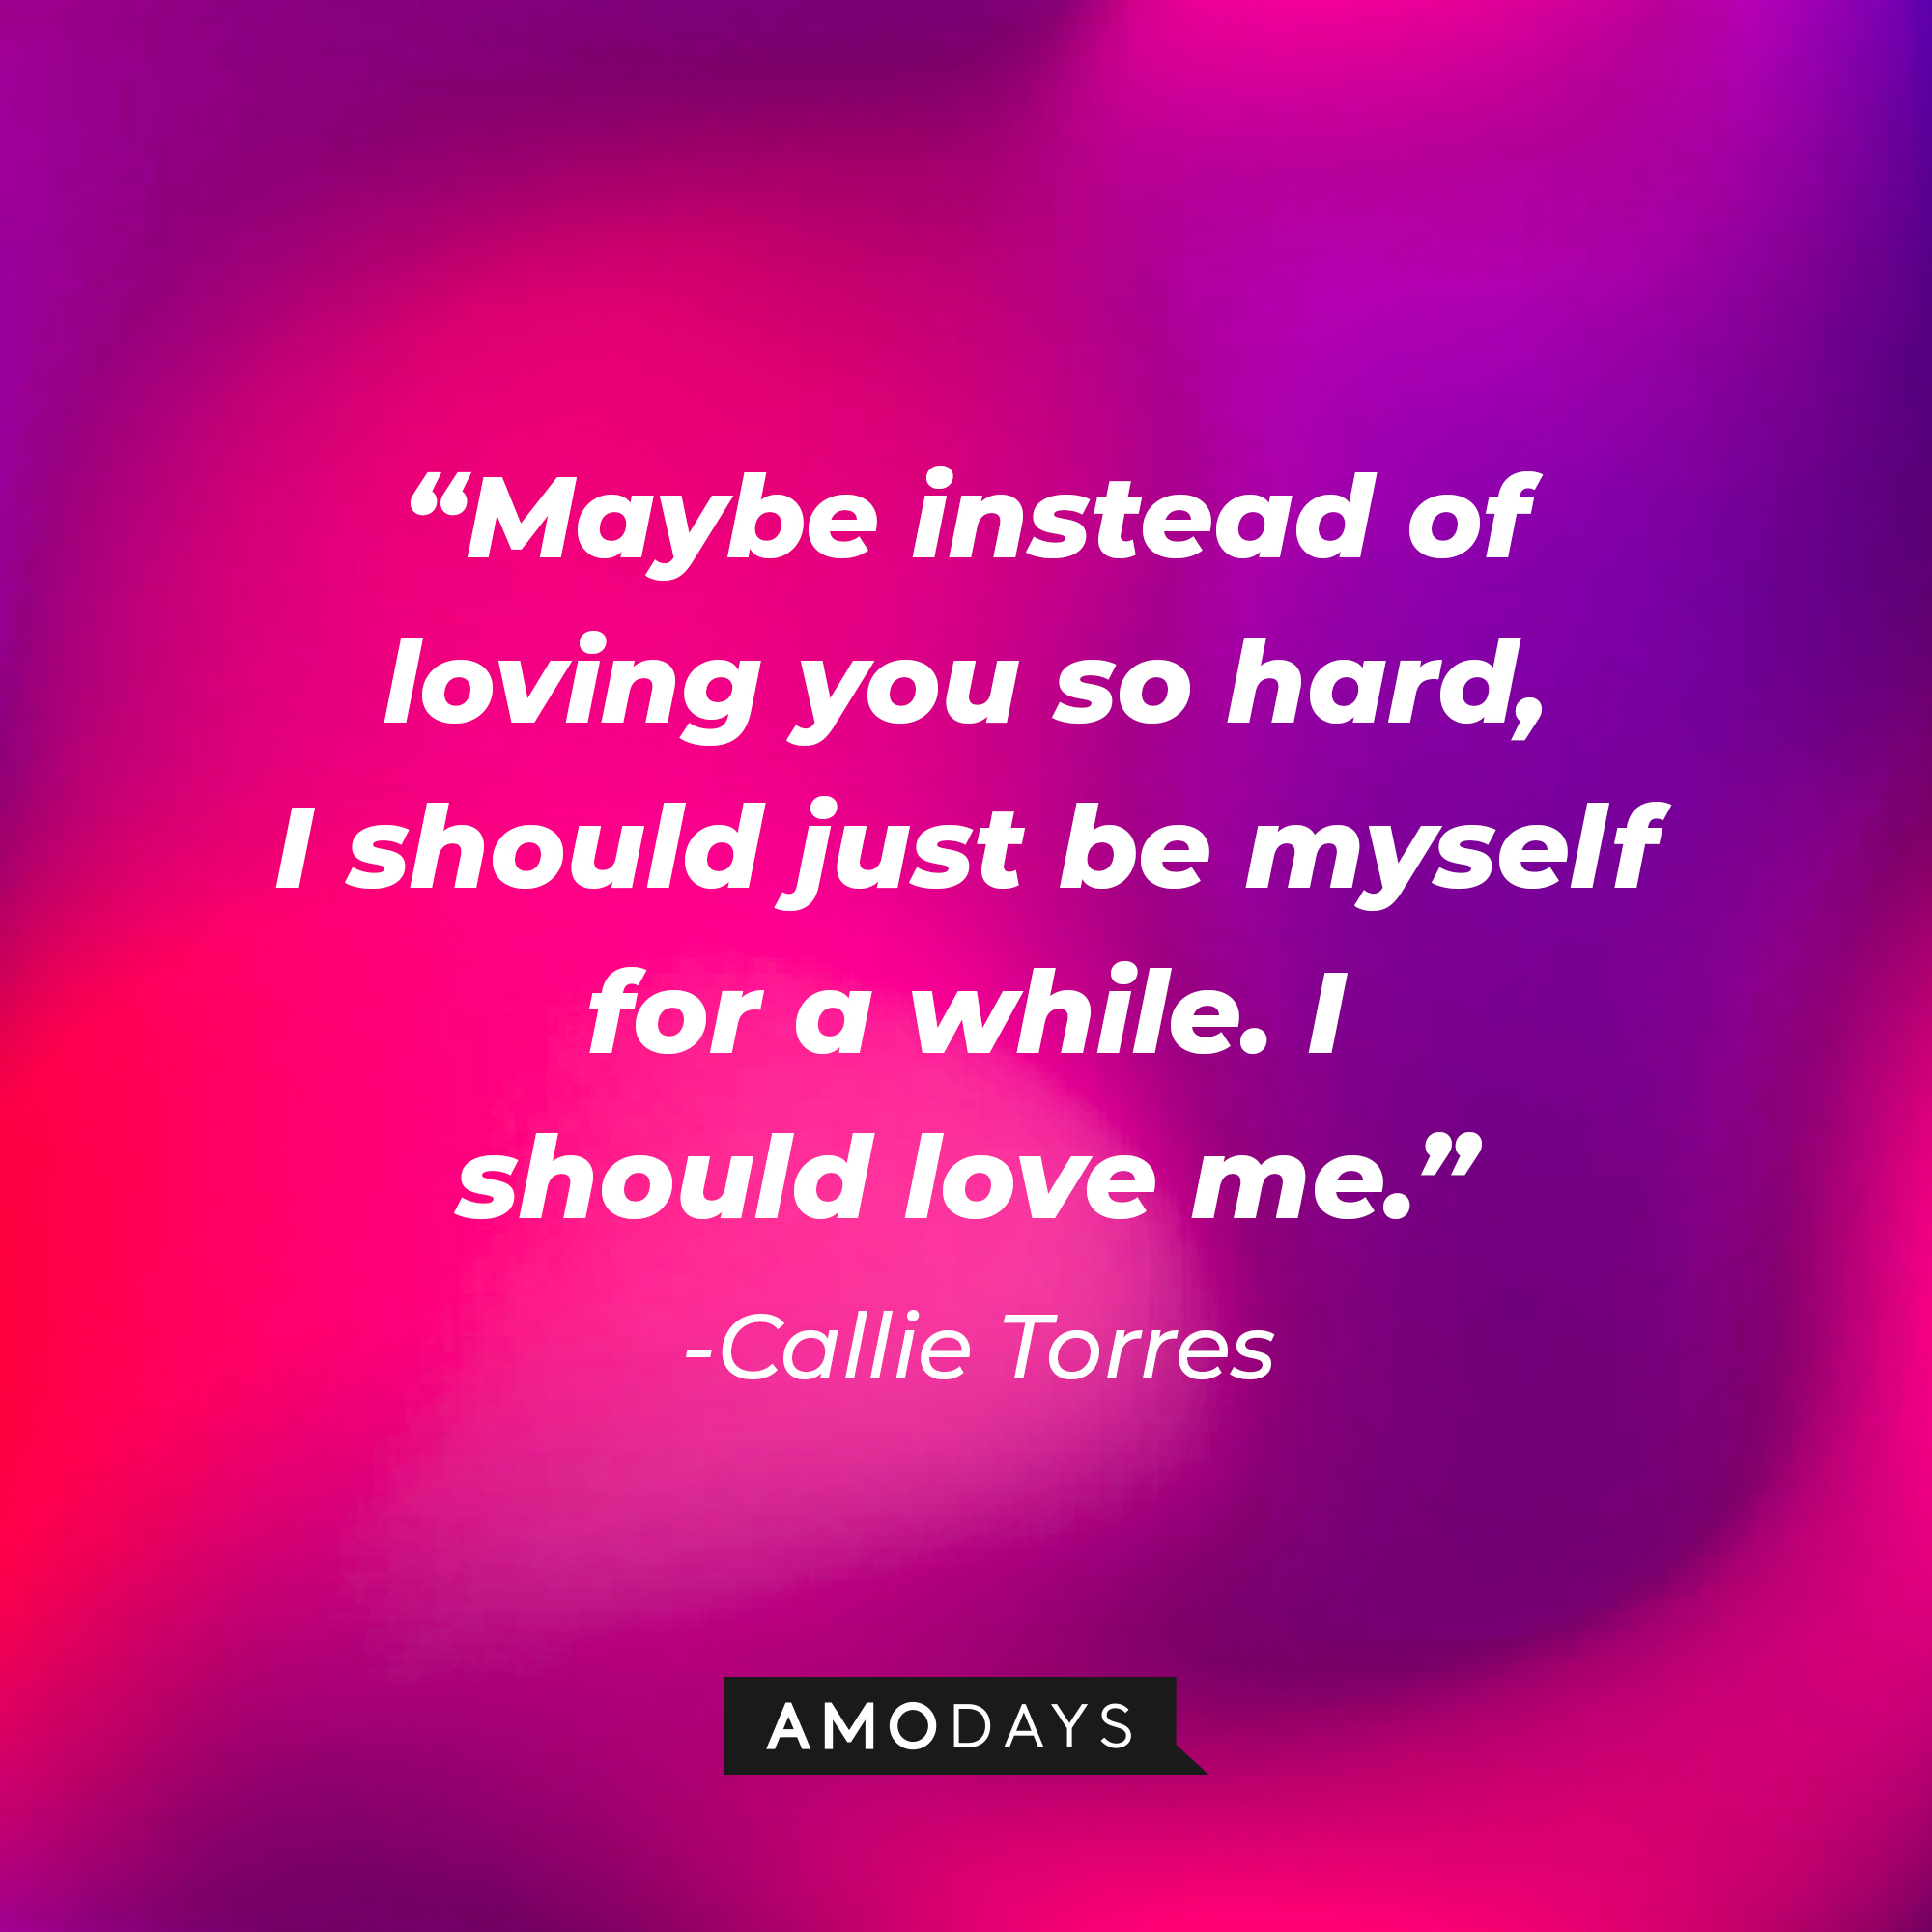 Callie Torres' quote: “Maybe instead of loving you so hard, I should just be myself for a while. I should love me.” | Source: youtube.com/ABCNetwork